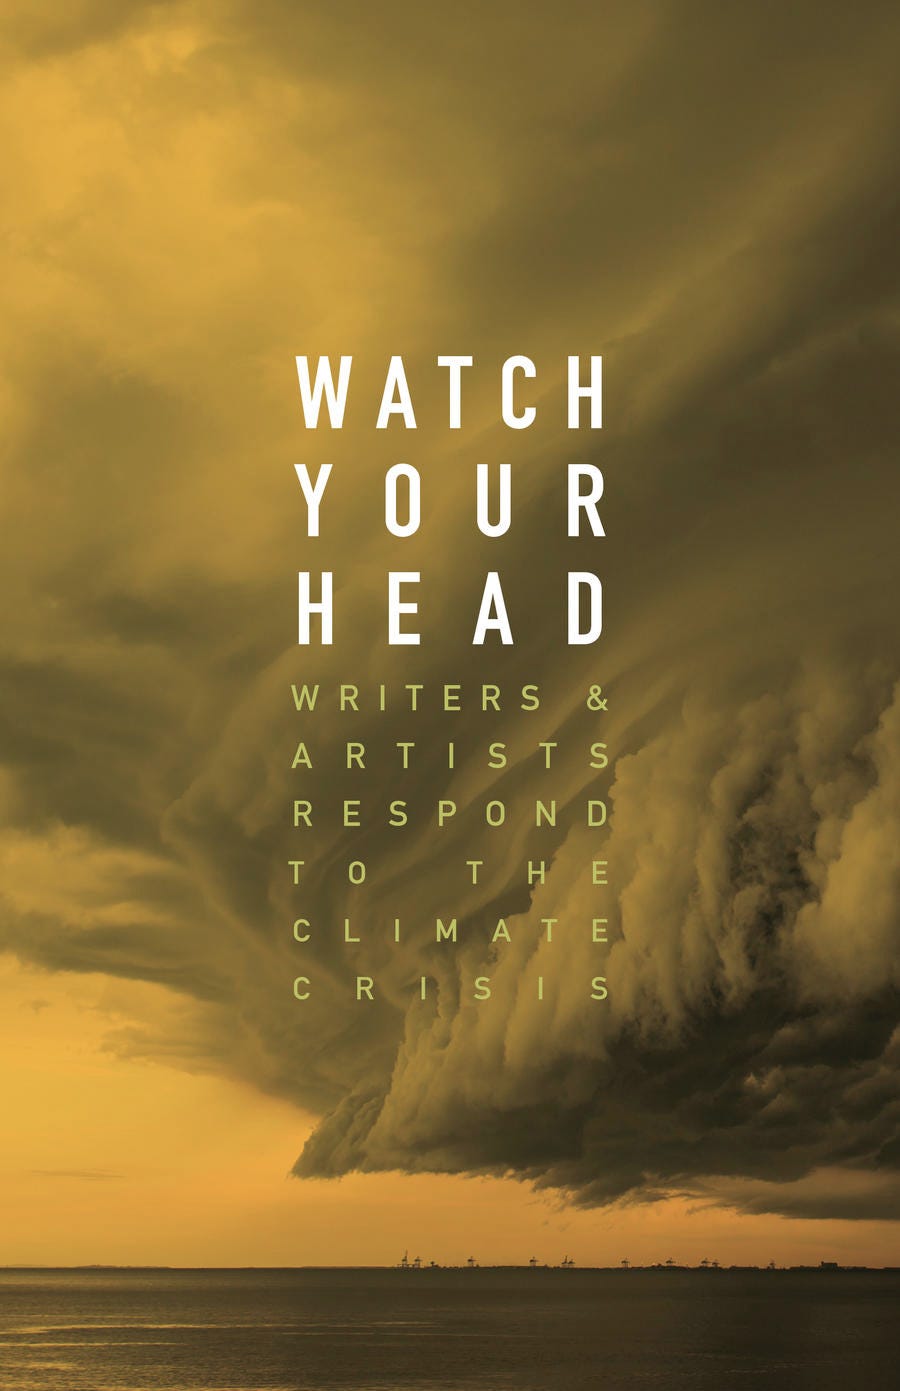 Watch Your Head Writers and Artists Respond to the Climate Crisis (Coach House Books, 2020).